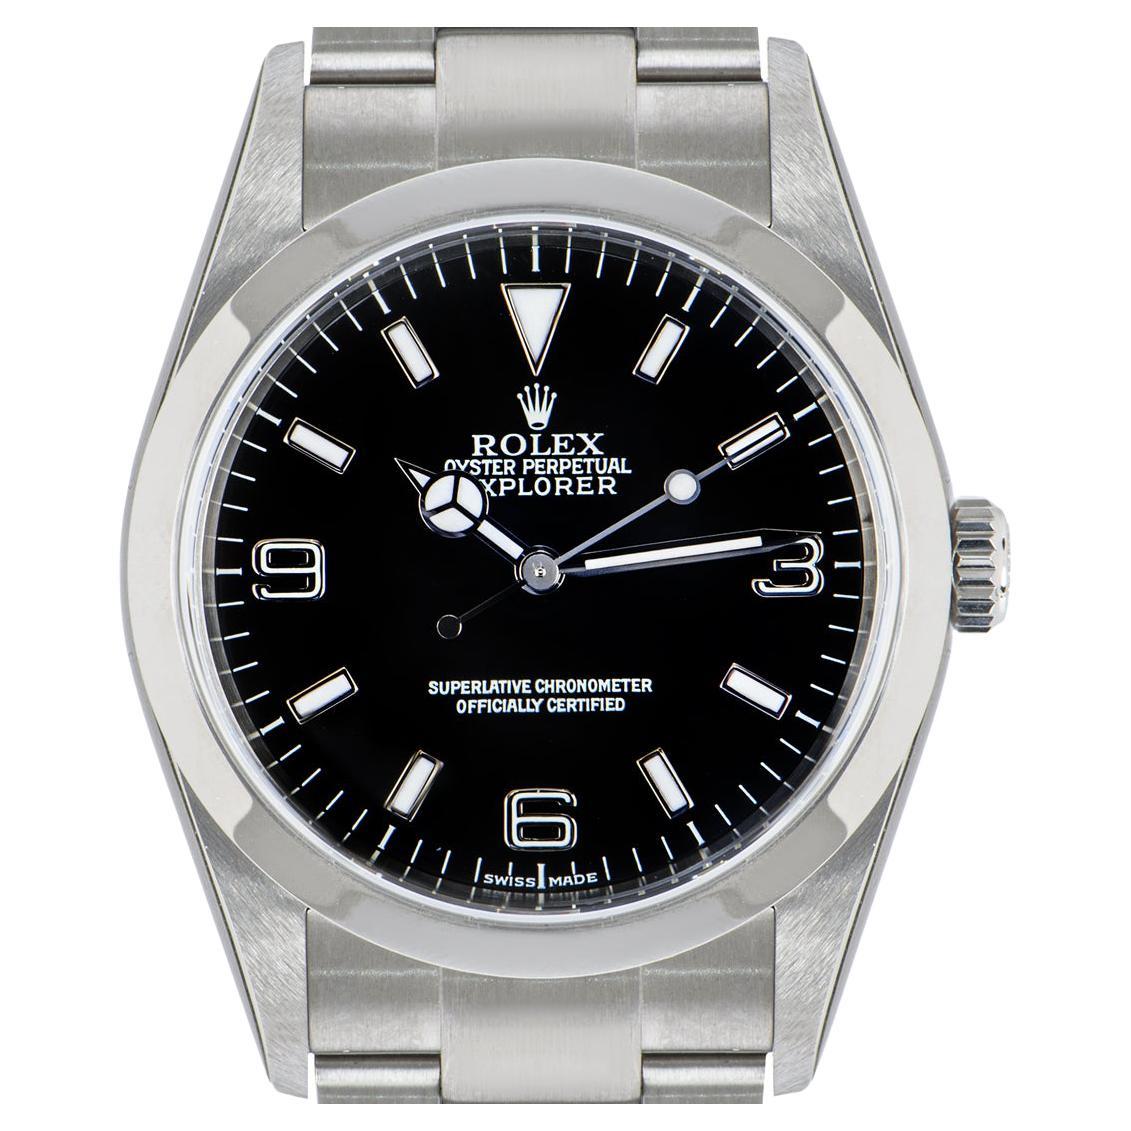 An unworn NOS 36mm Explorer I in Oystersteel by Rolex. Features a black dial and the iconic smooth bezel. The Oyster bracelet comes equipped with a folding Oysterlock clasp. Fitted with scratch-resistant sapphire crystal and a self-winding automatic